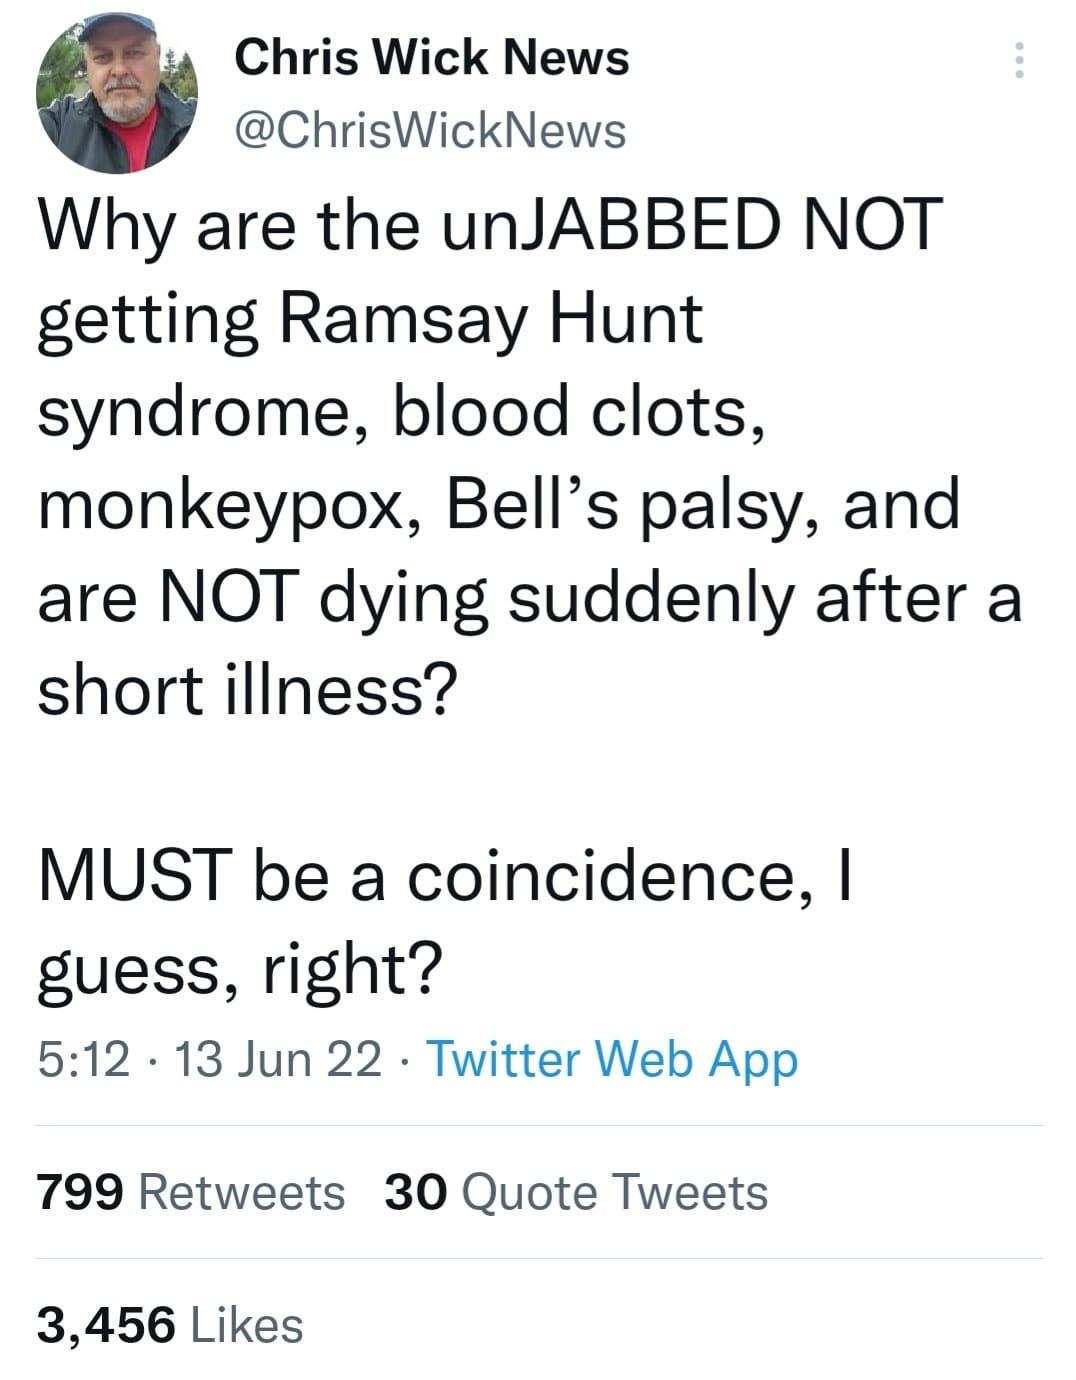 May be a Twitter screenshot of 1 person and text that says "Chris Wick News @ChrisWickNews Why are the unJABBED NOT getting Ramsay Hunt syndrome, blood clots, monkeypox, Bell's palsy, and are NOT dying suddenly after a short illness? MUST be a coincidence, guess, right? 5:12 13 Jun 22 Twitter Web App 799 Retweets 30 Quote Tweets 3,456 Likes"